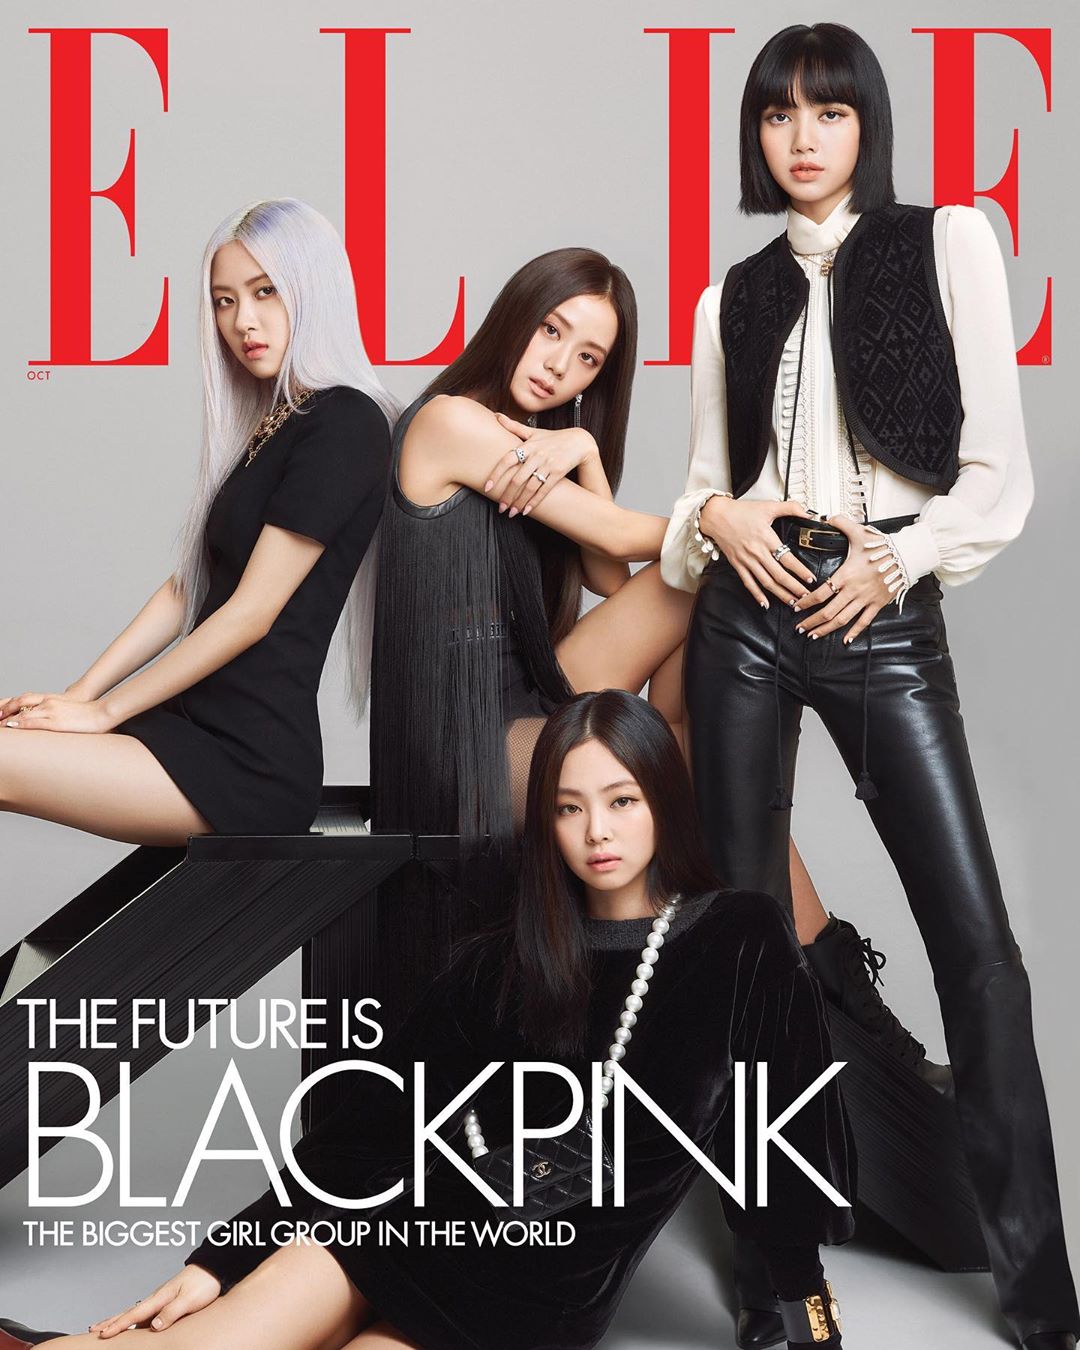 BLACKPINK Cover ELLE Magazine's October Issue - That Grape Juice